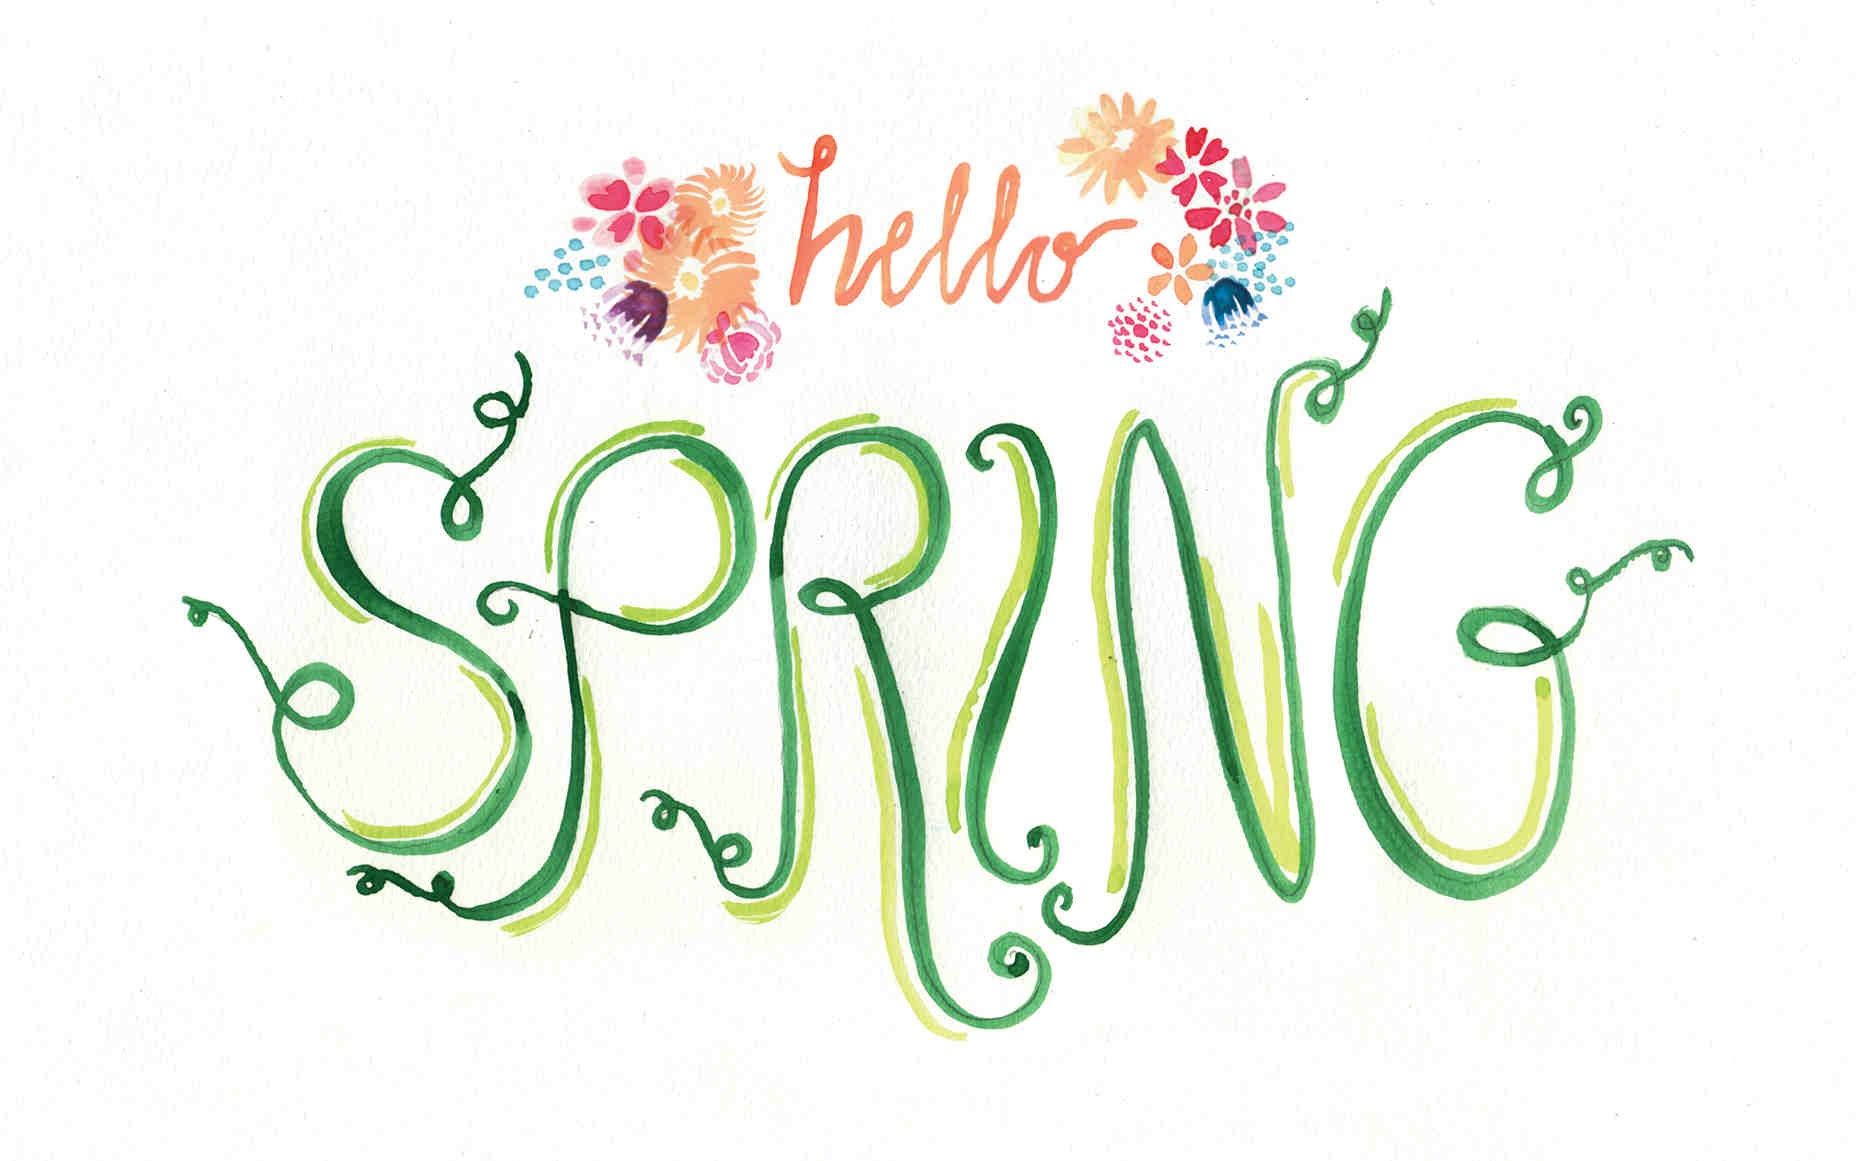 Hello Spring! Free computer wallpaper download at tinyinklings.com